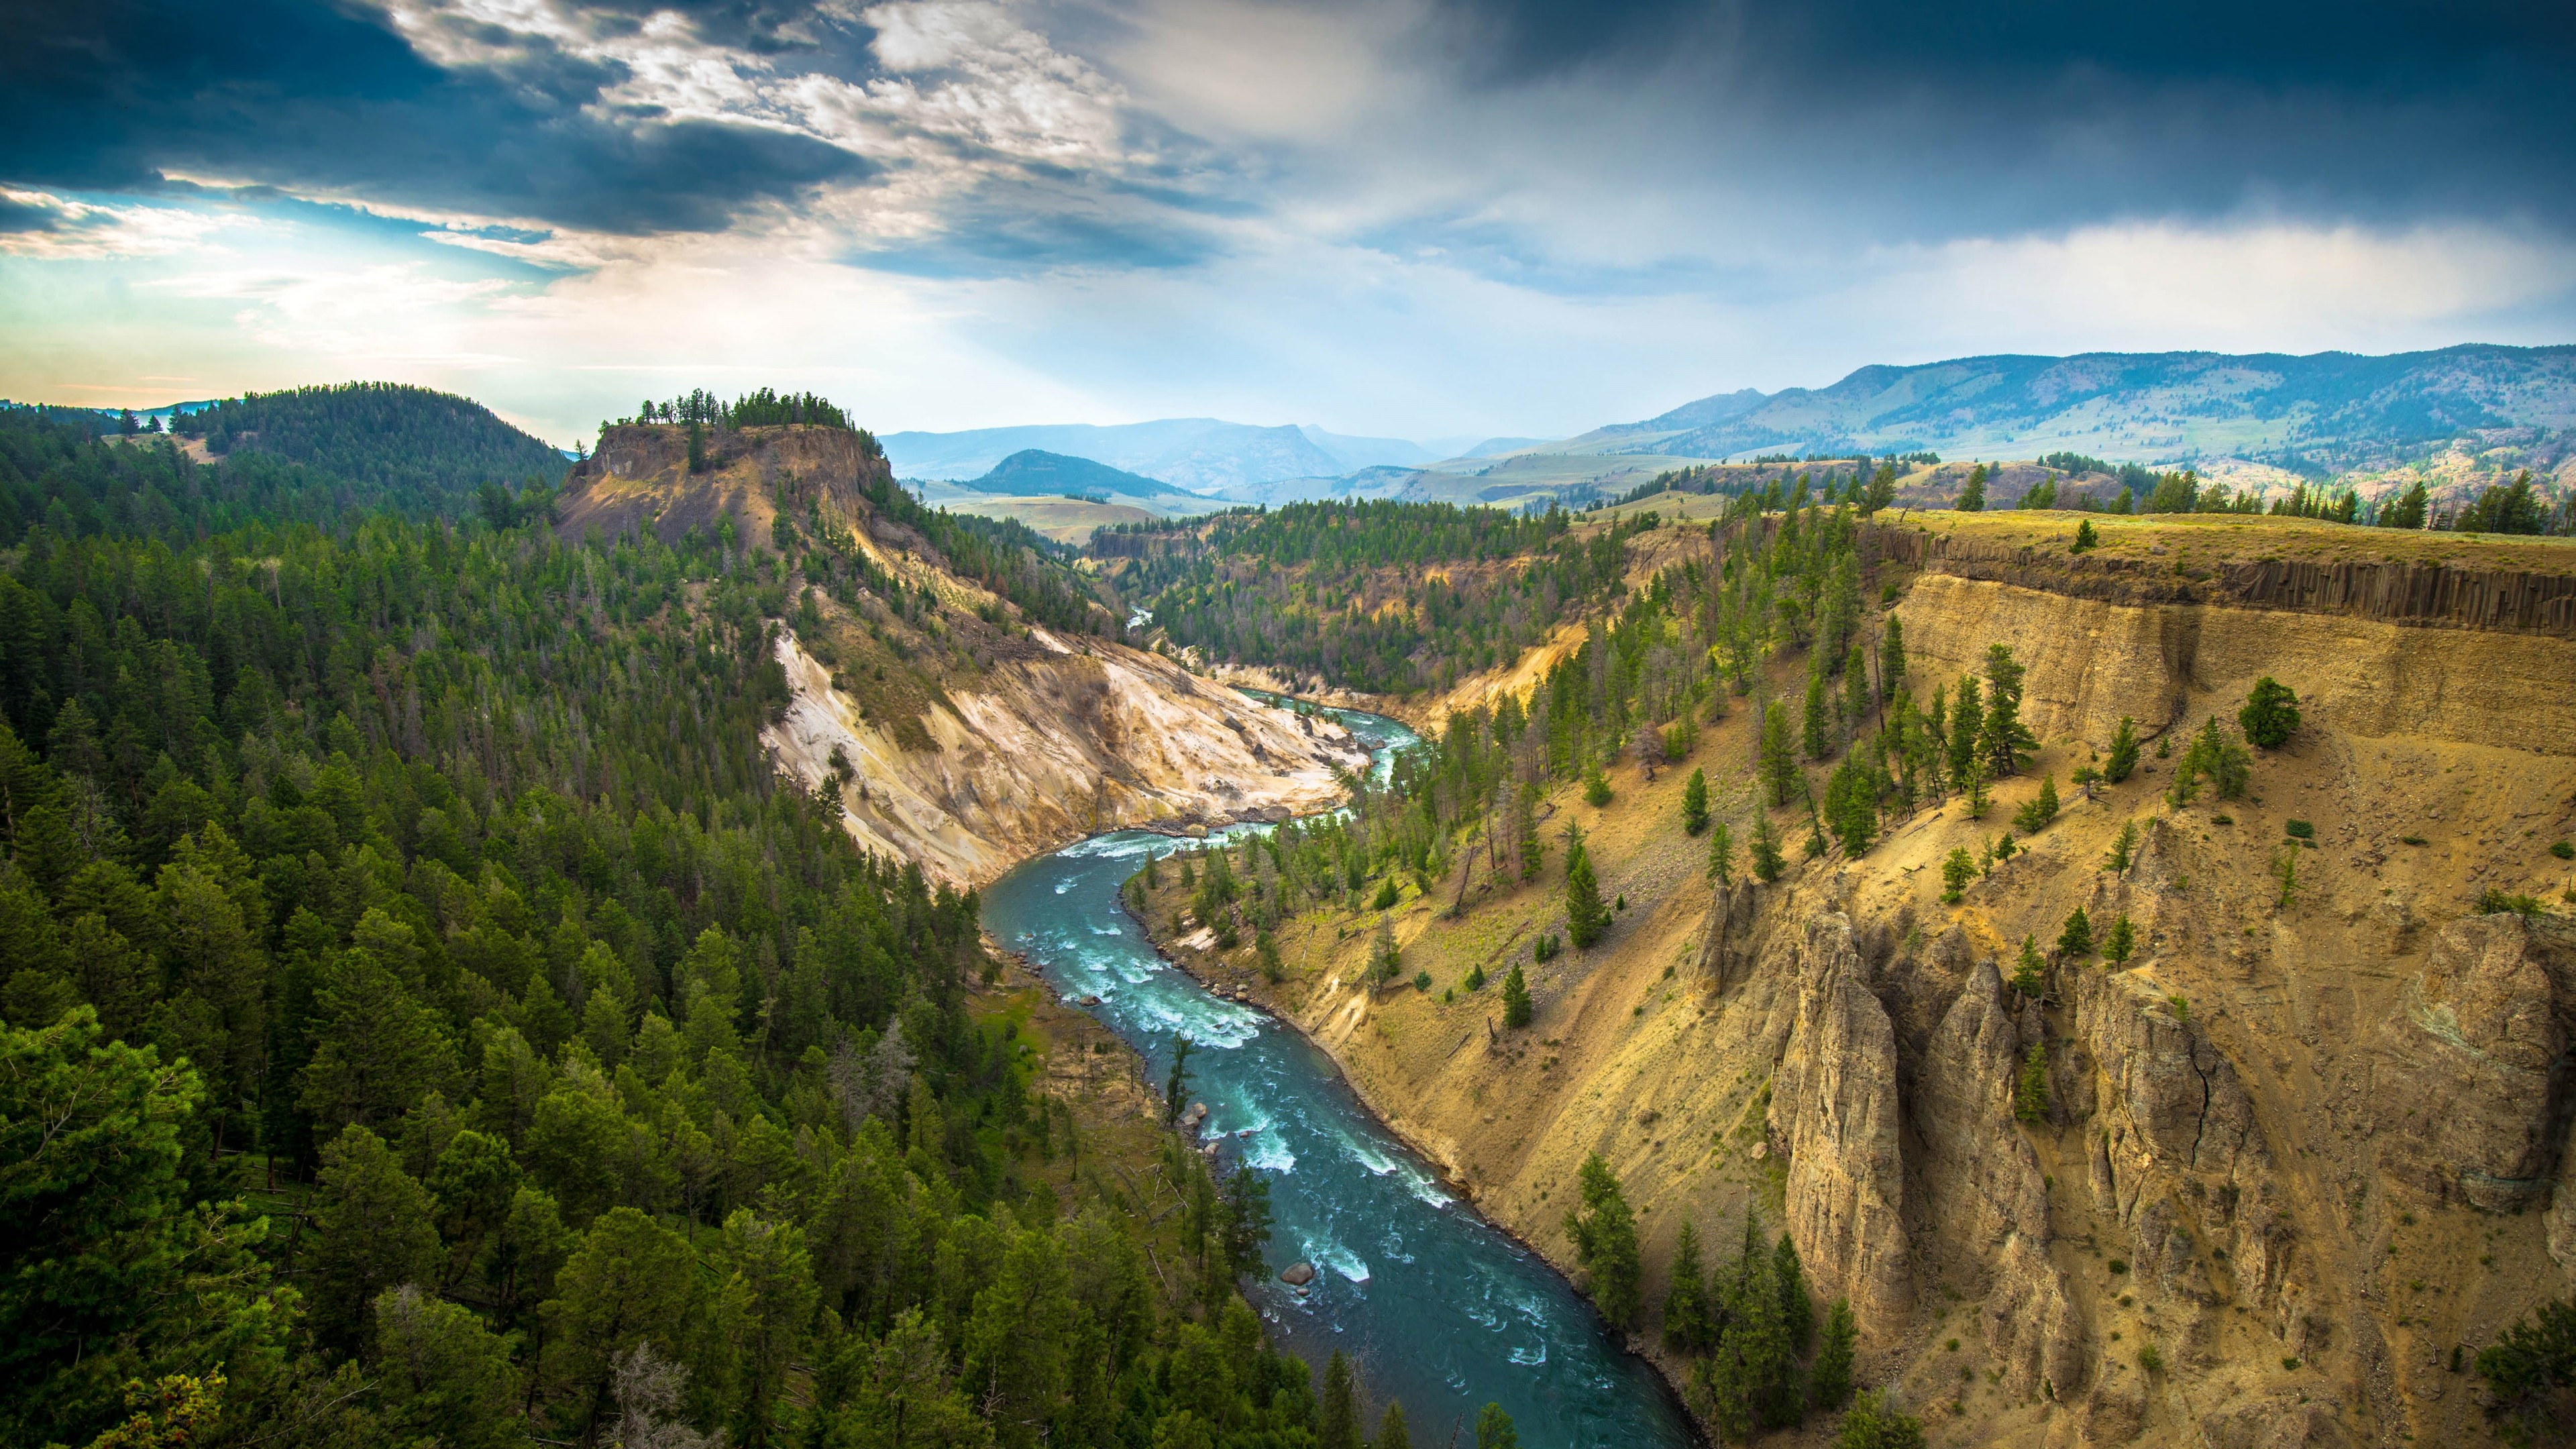 The River, Grand Canyon of Yellowstone National Park, USA Wallpaper for Desktop 4K 3840x2160